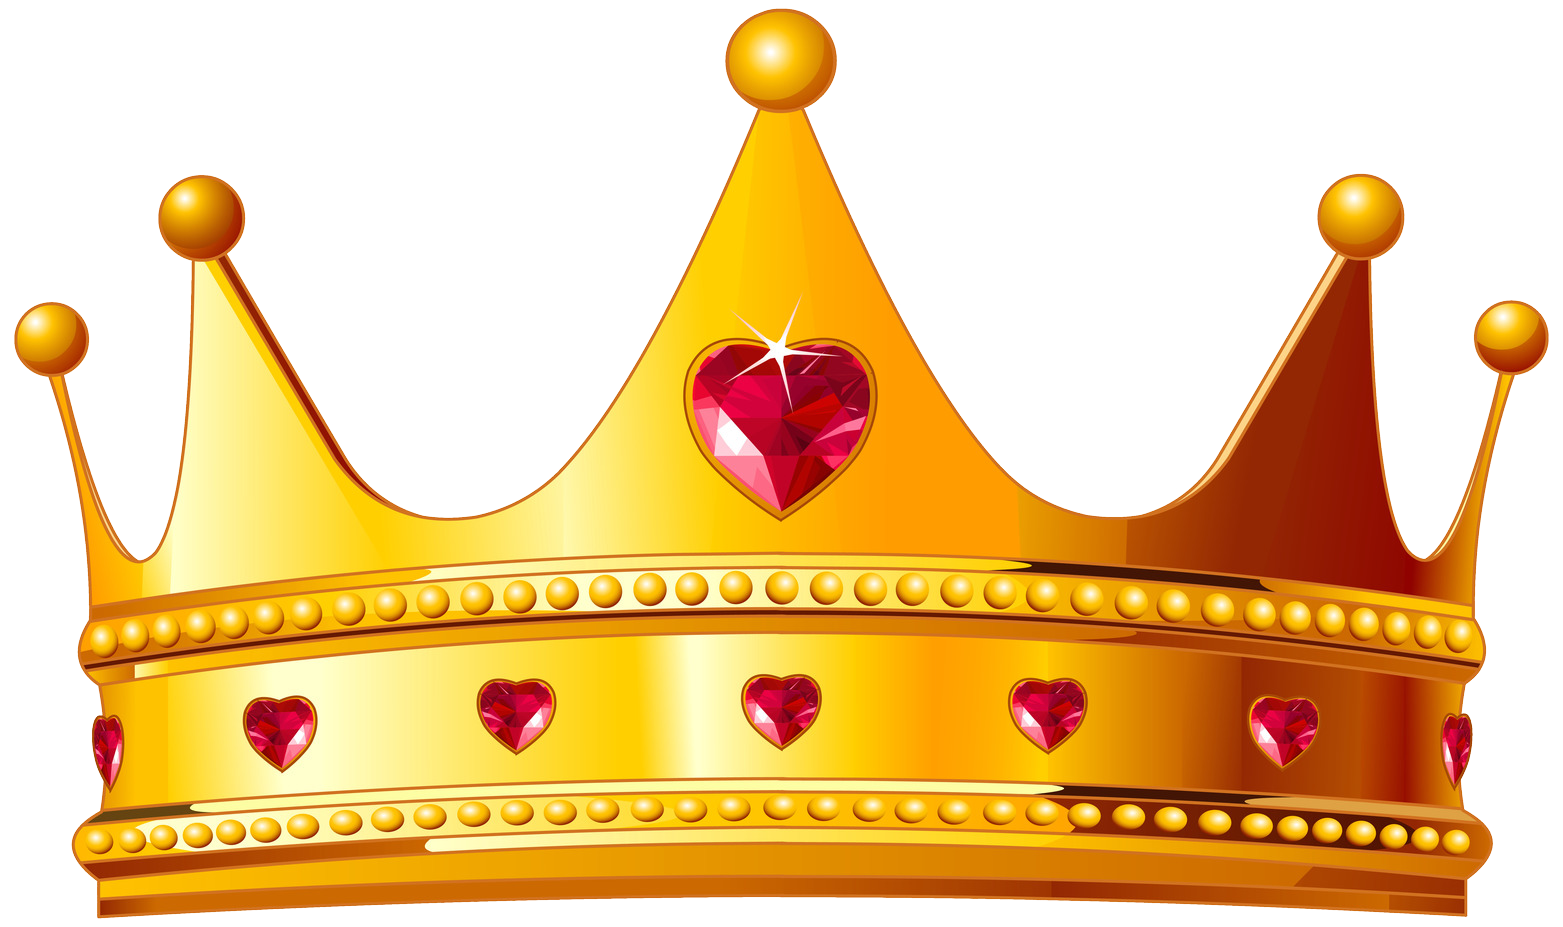 Crown of a king clipart